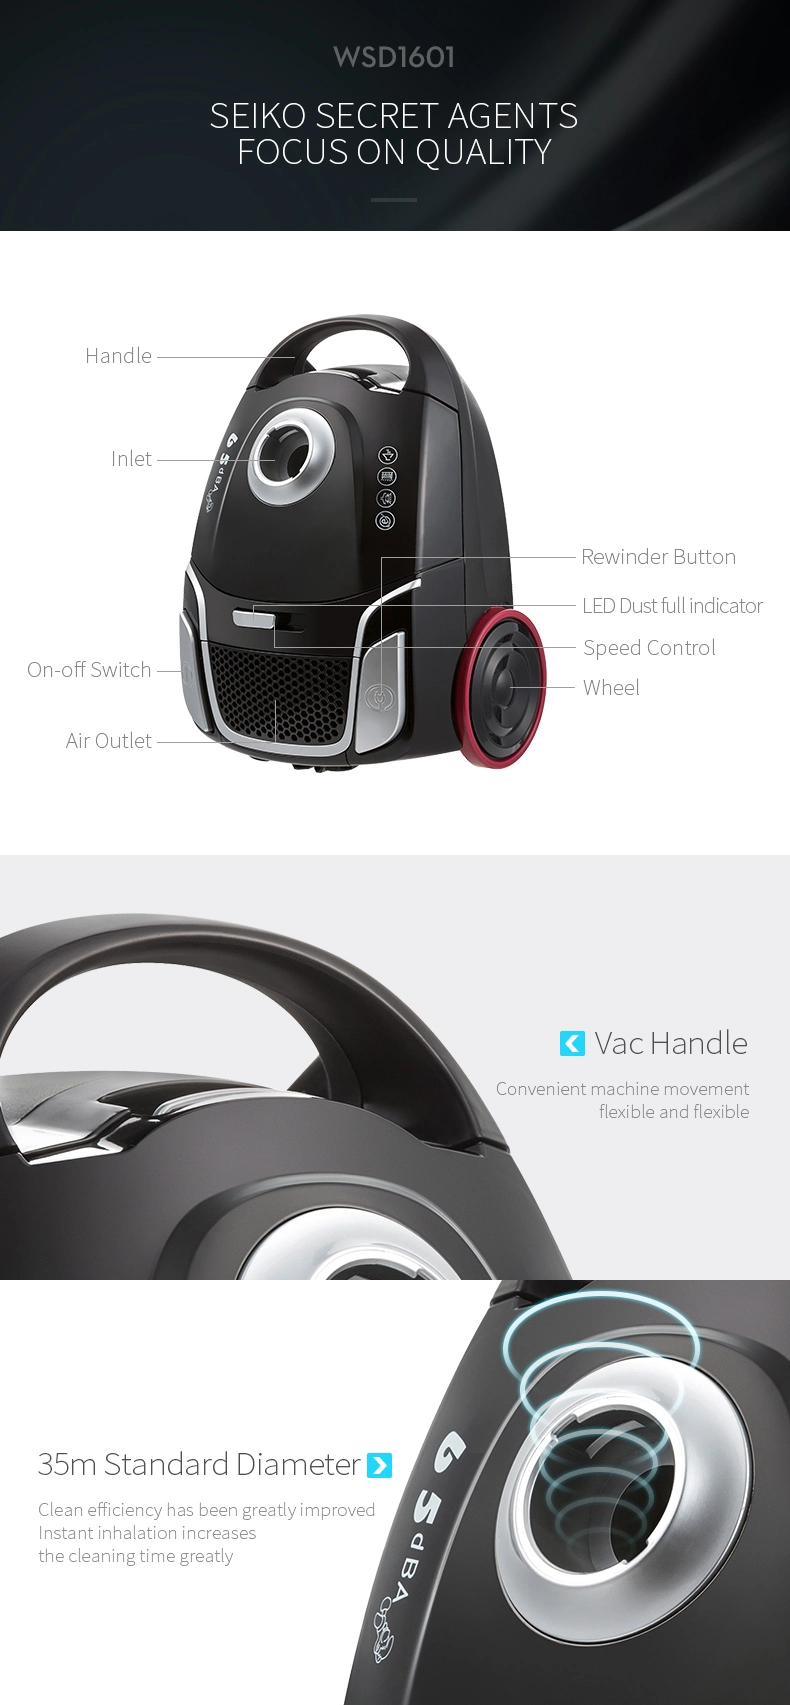 High Suction Home Appliance Best Vacuum Cleaner